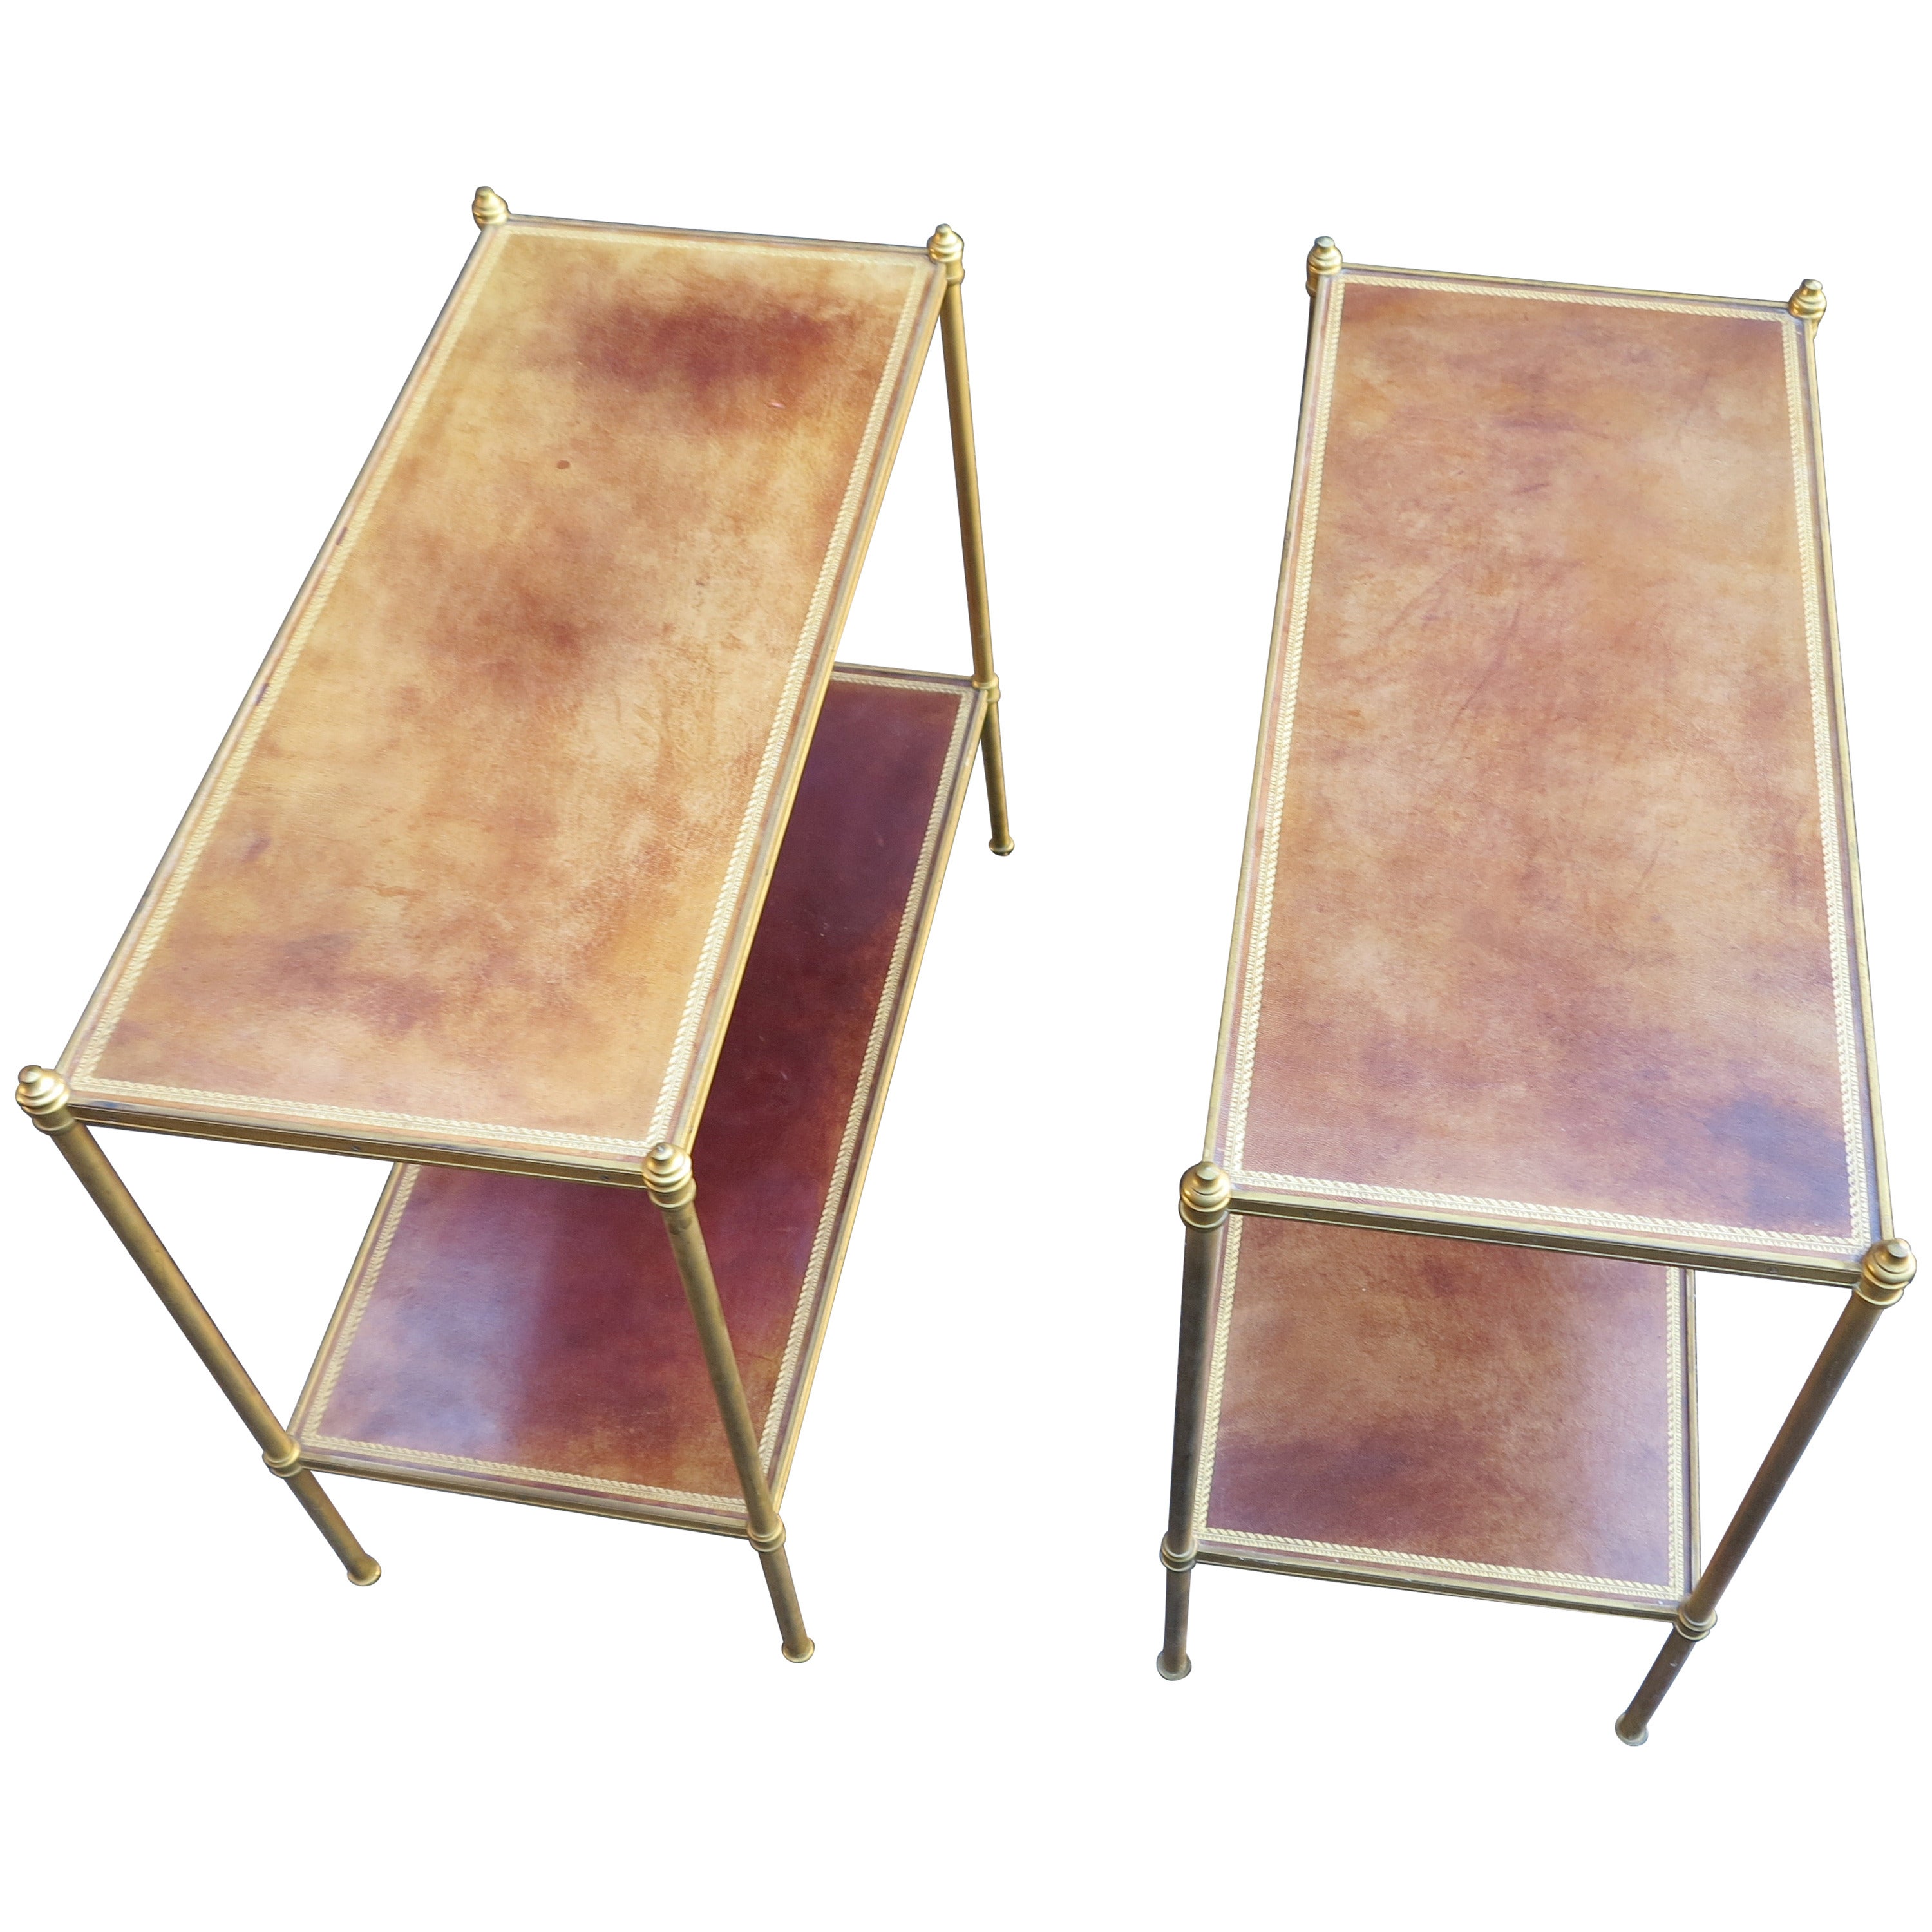 1970' Pair of Shelf in brass and bronze Maison Bagués 2 tray with leather